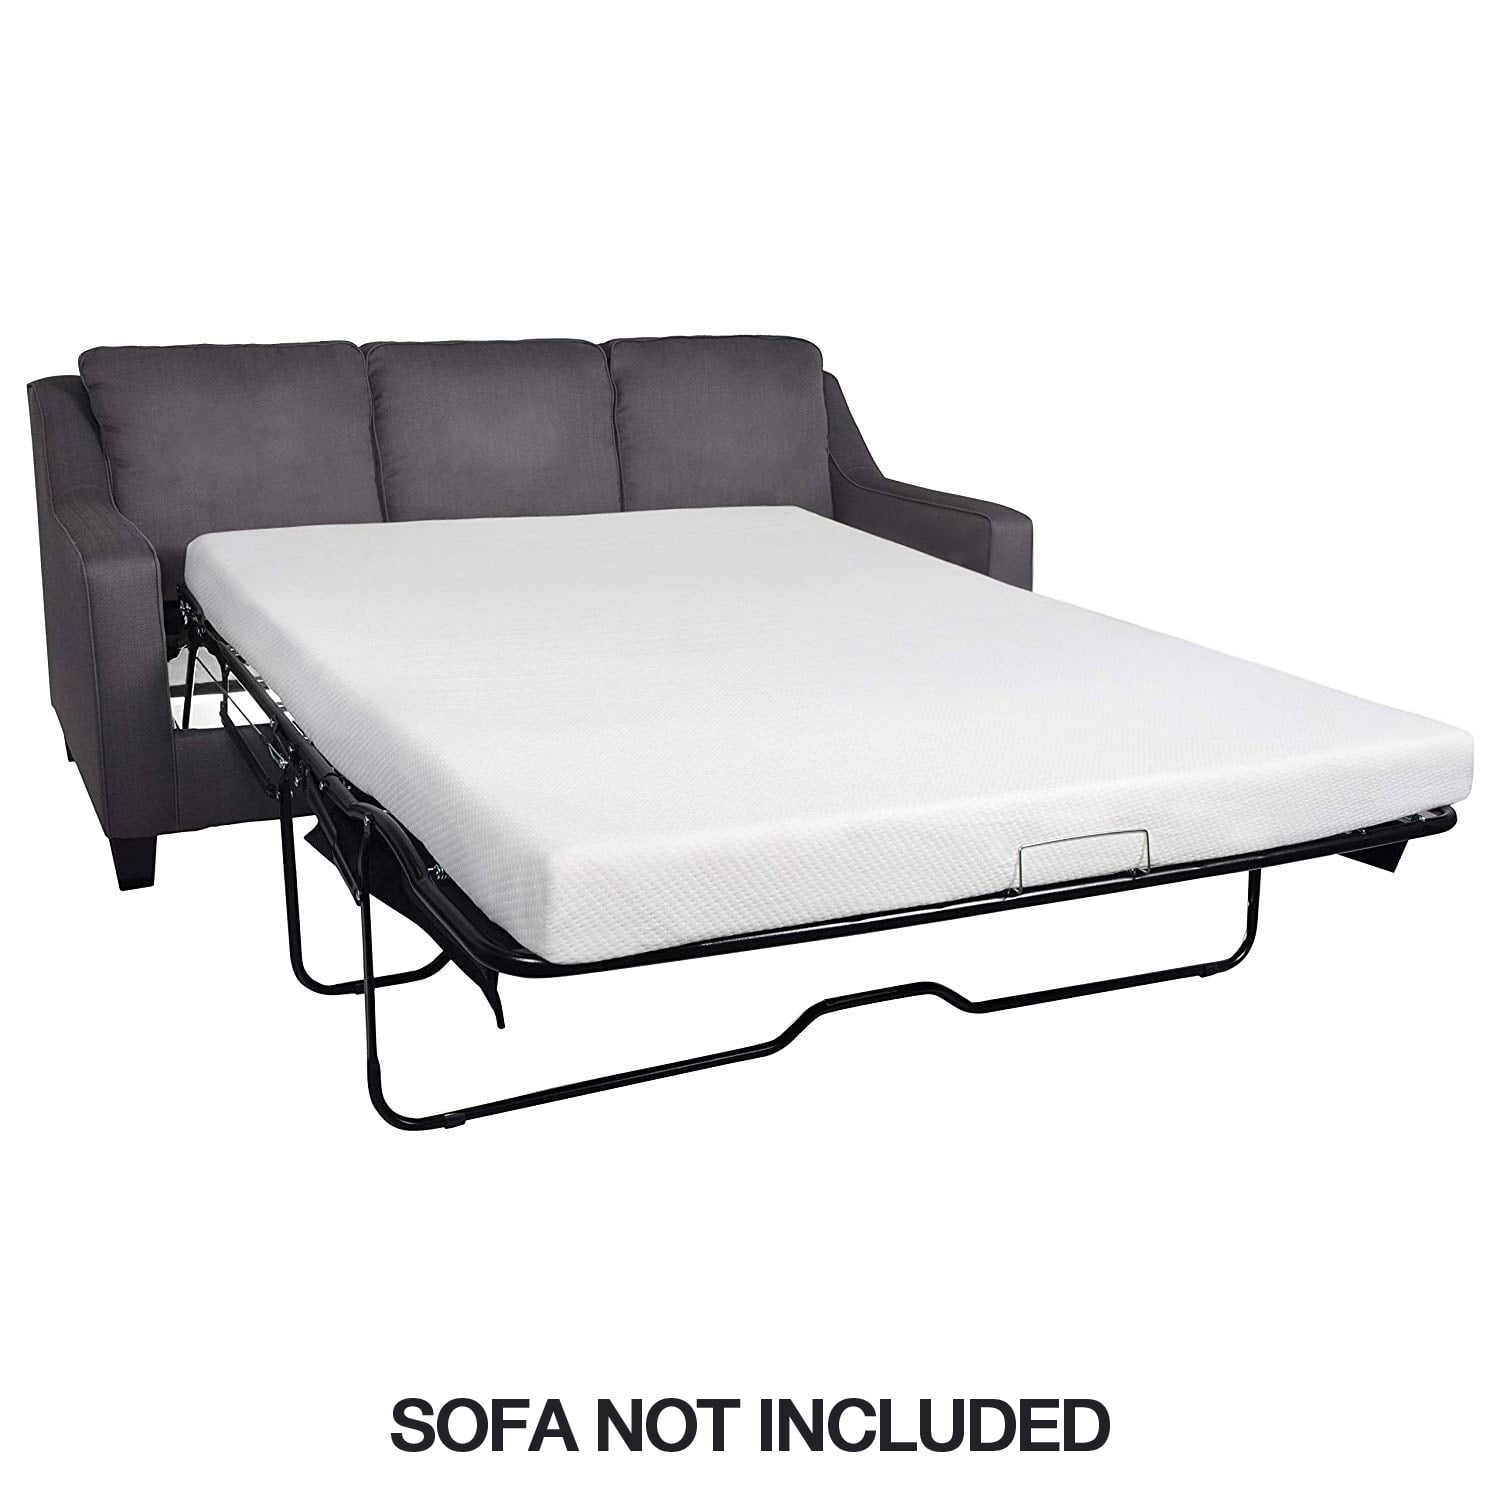 Where To Buy A Mattress For A Pull Out Couch